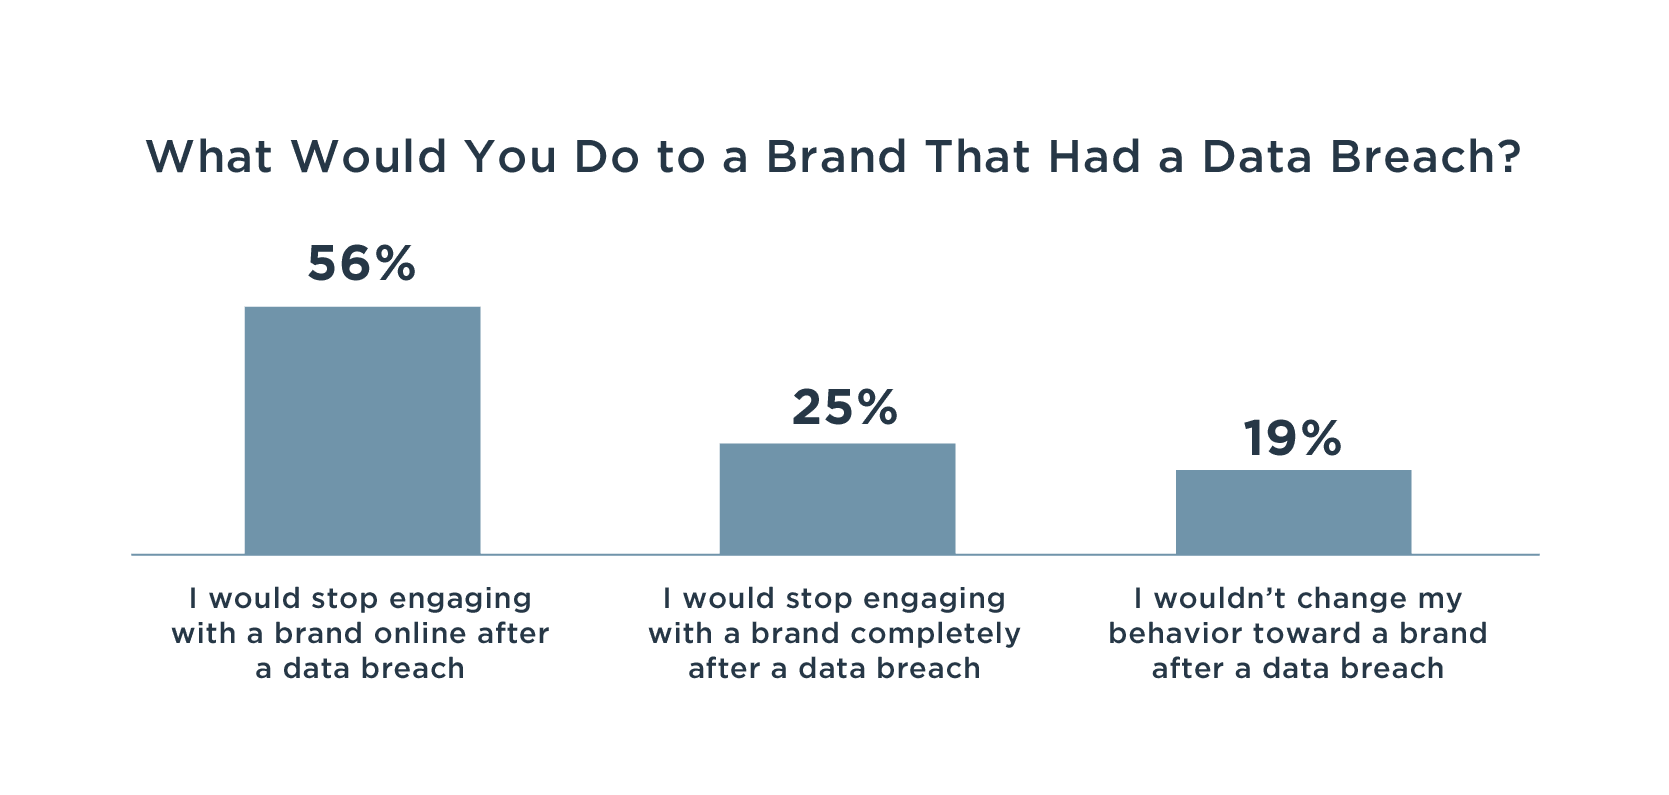 Bar chart showing percentages of what consumers would do to a brand that had a data breach.